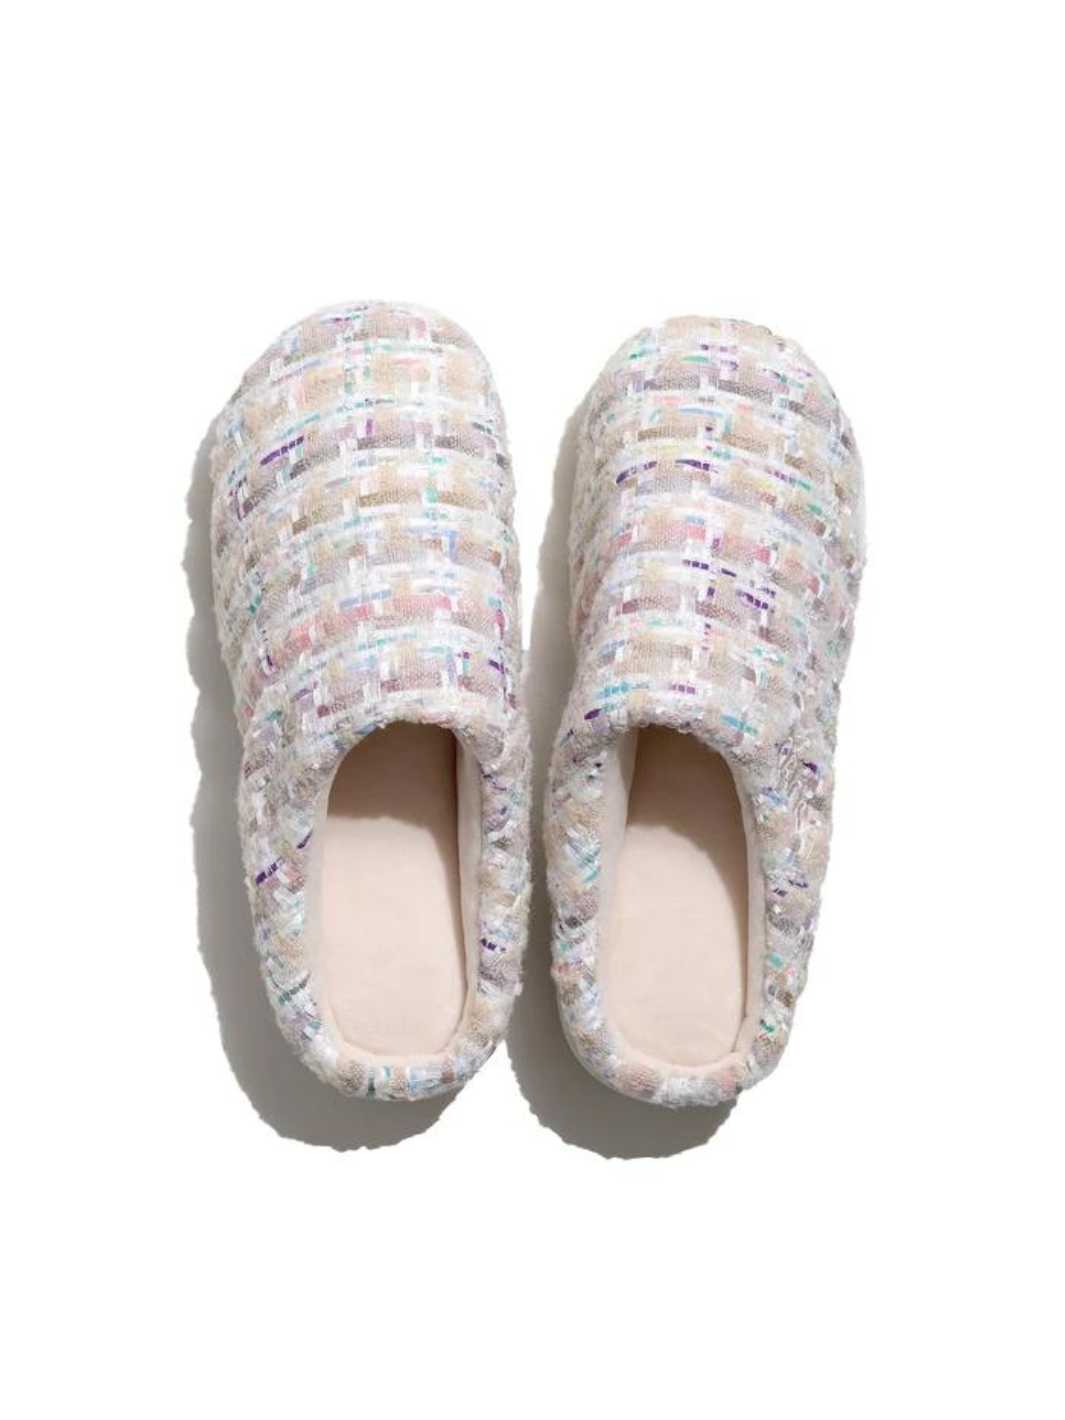 Subu Shoes Slip-On | Slippers Concept Cloudbow